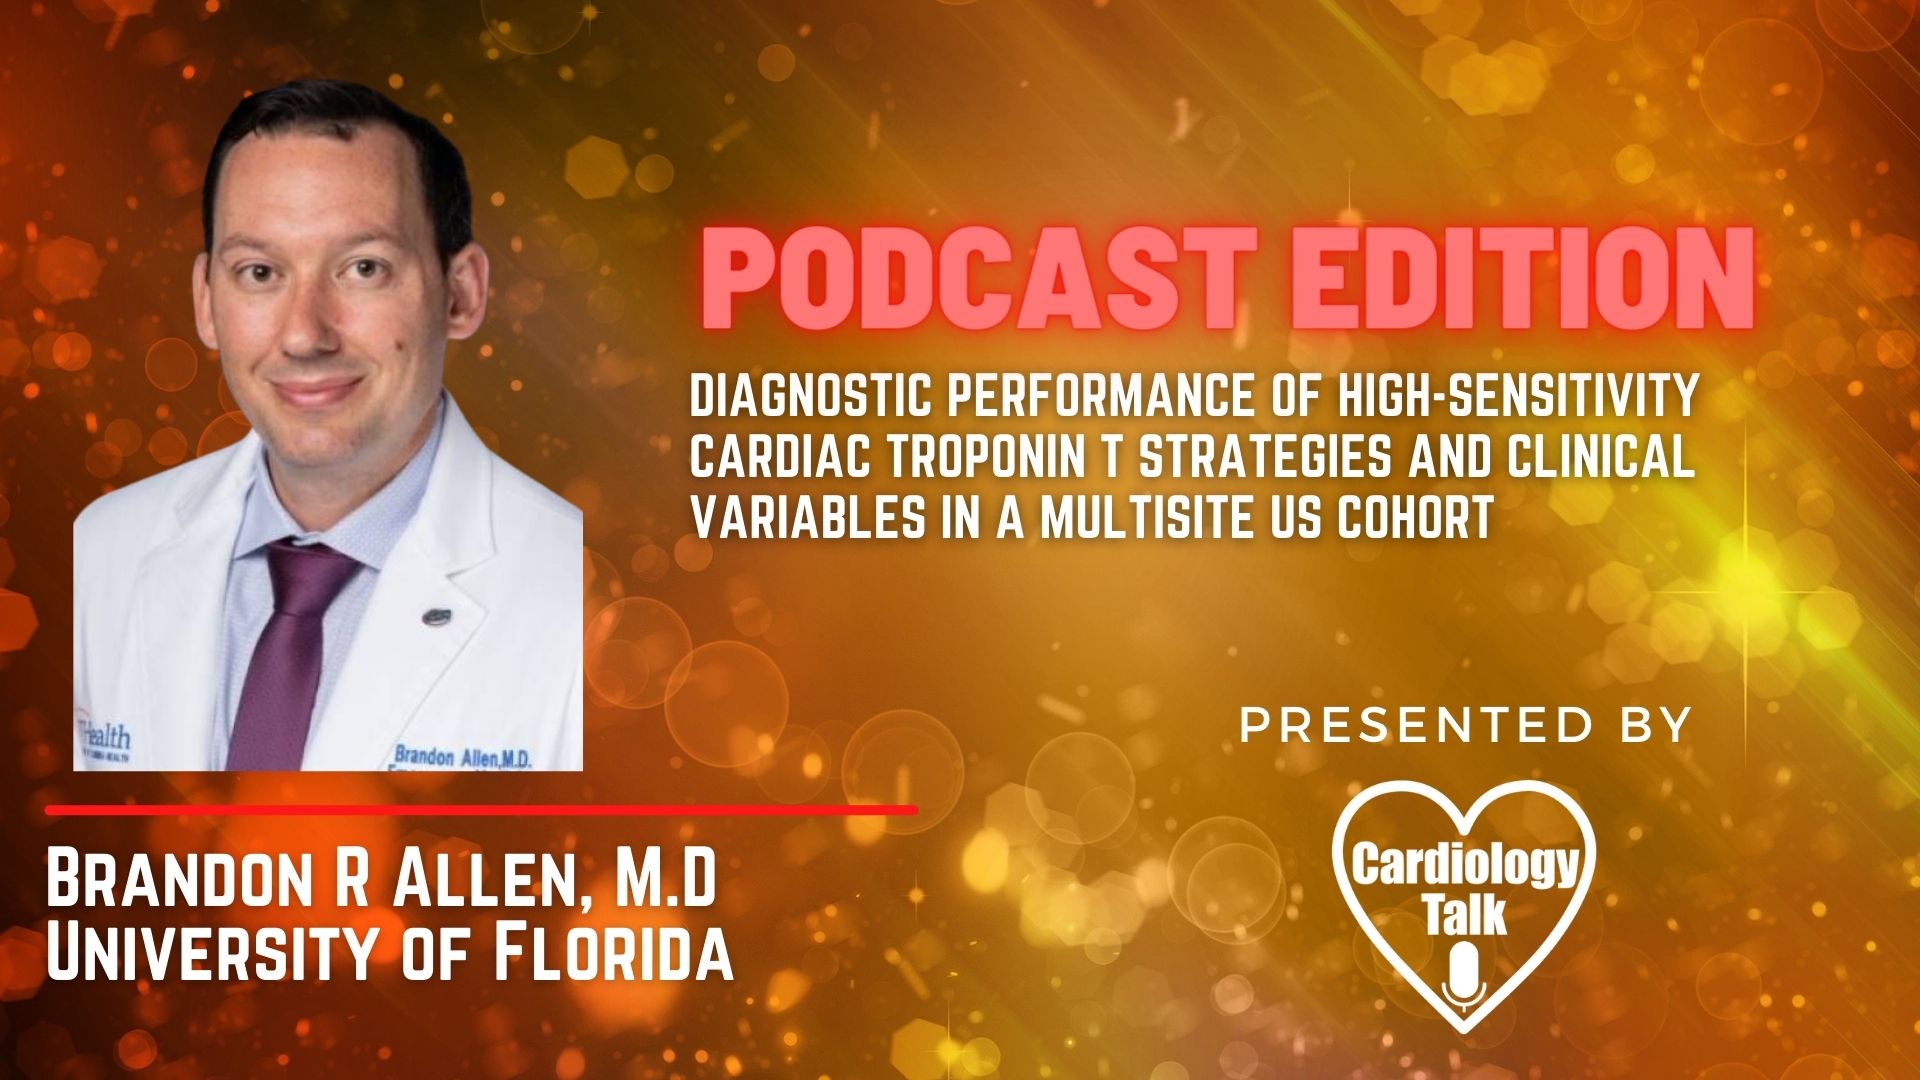 Podcast- Brandon Allen, MD- Diagnostic Performance of High-Sensitivity Cardiac Troponin T Strategies and Clinical Variables in a Multisite US Cohort  #UFHealth  #UniversityOfFlorida  #Car...